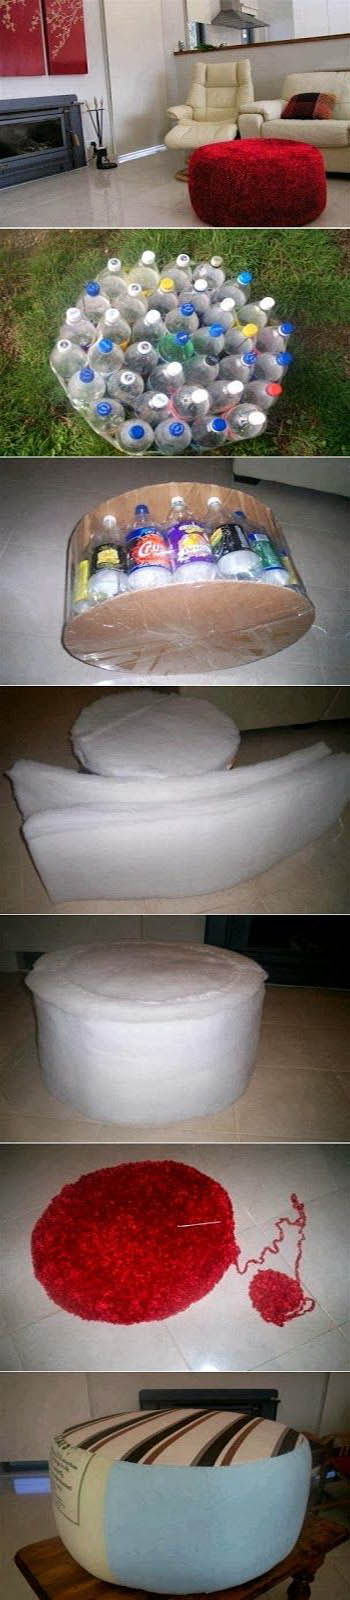 Make an Ottoman By Recycling Plastic Bottle